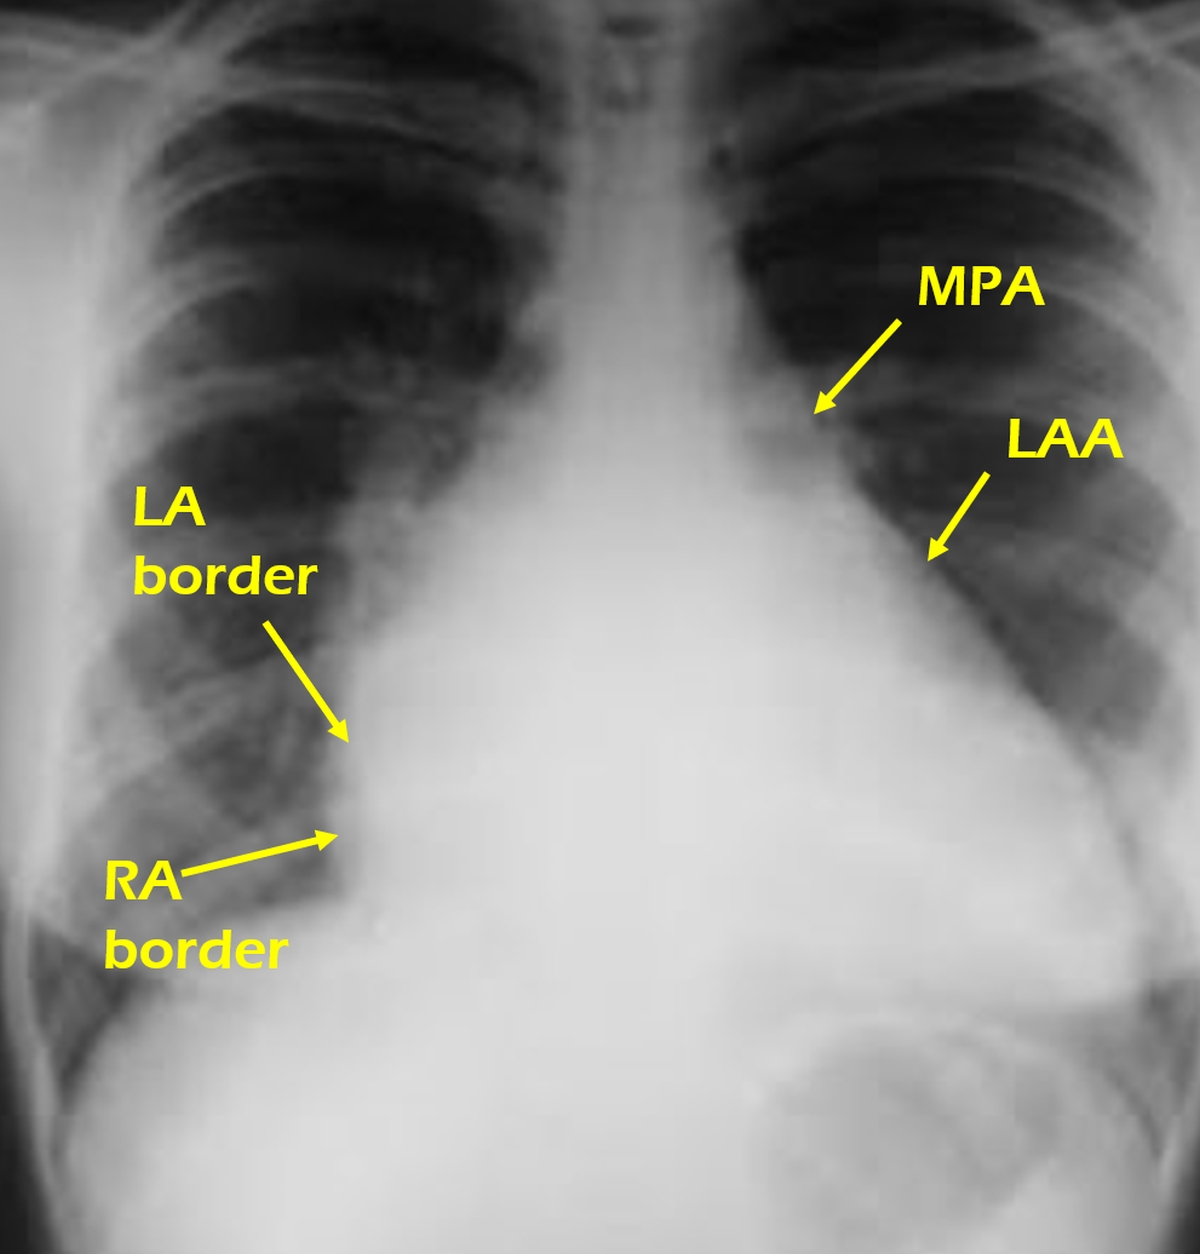 X-ray chest PA view showing biatrial enlargement